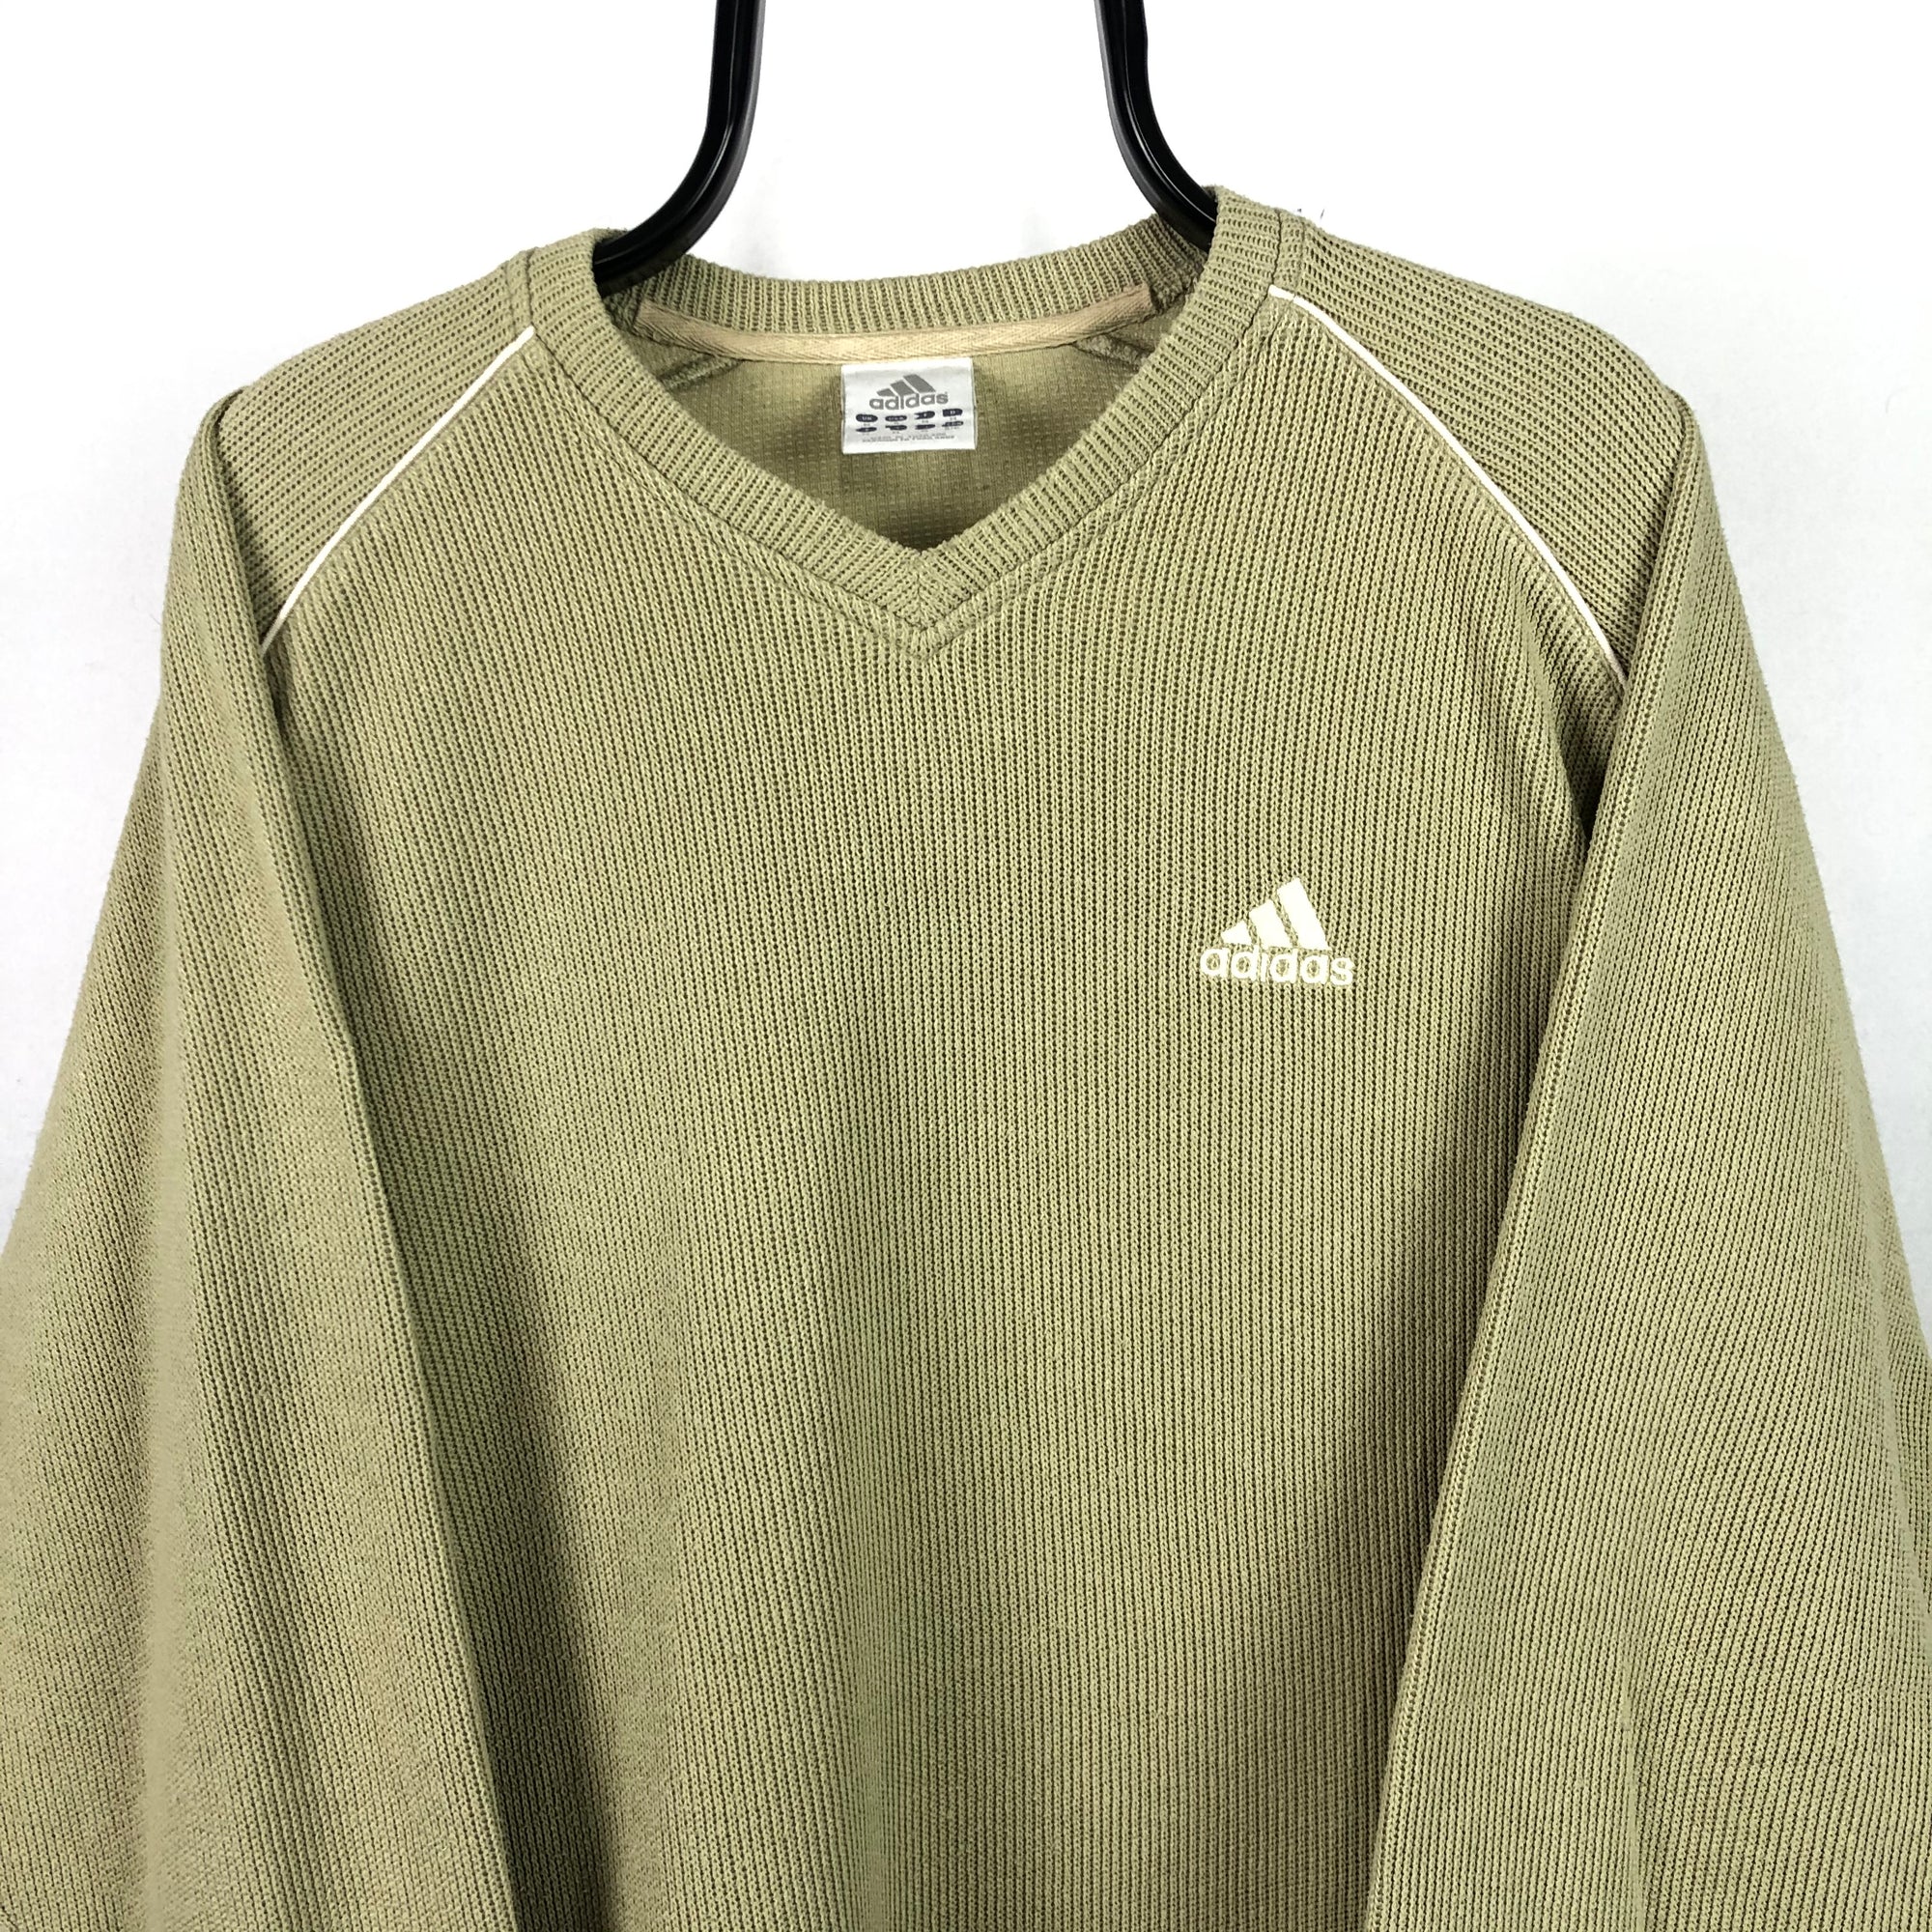 Vintage Adidas Embroidered Small Logo Sweater in Beige - Men's Medium/Women's Large